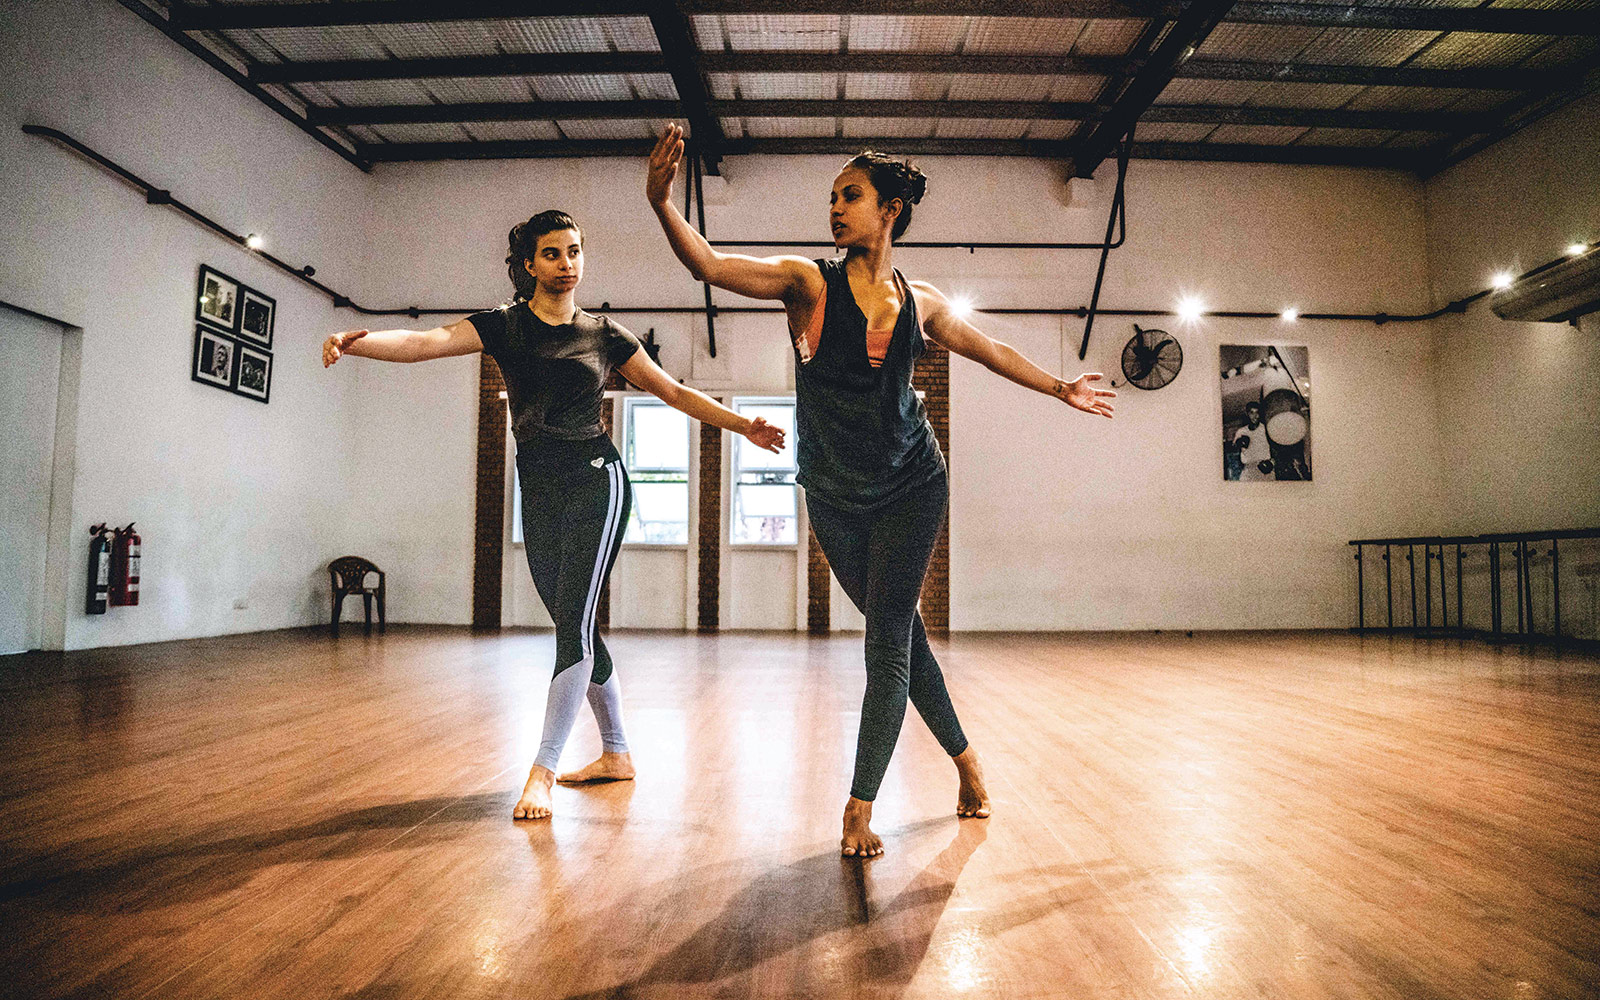 Umeshi Rajeendra works with a student at Mesh Academy in Sri Lanka. The dance school works with students on technique, but also pushes them to consider the ways dance can be used as commentary on social, economic, and political issues.